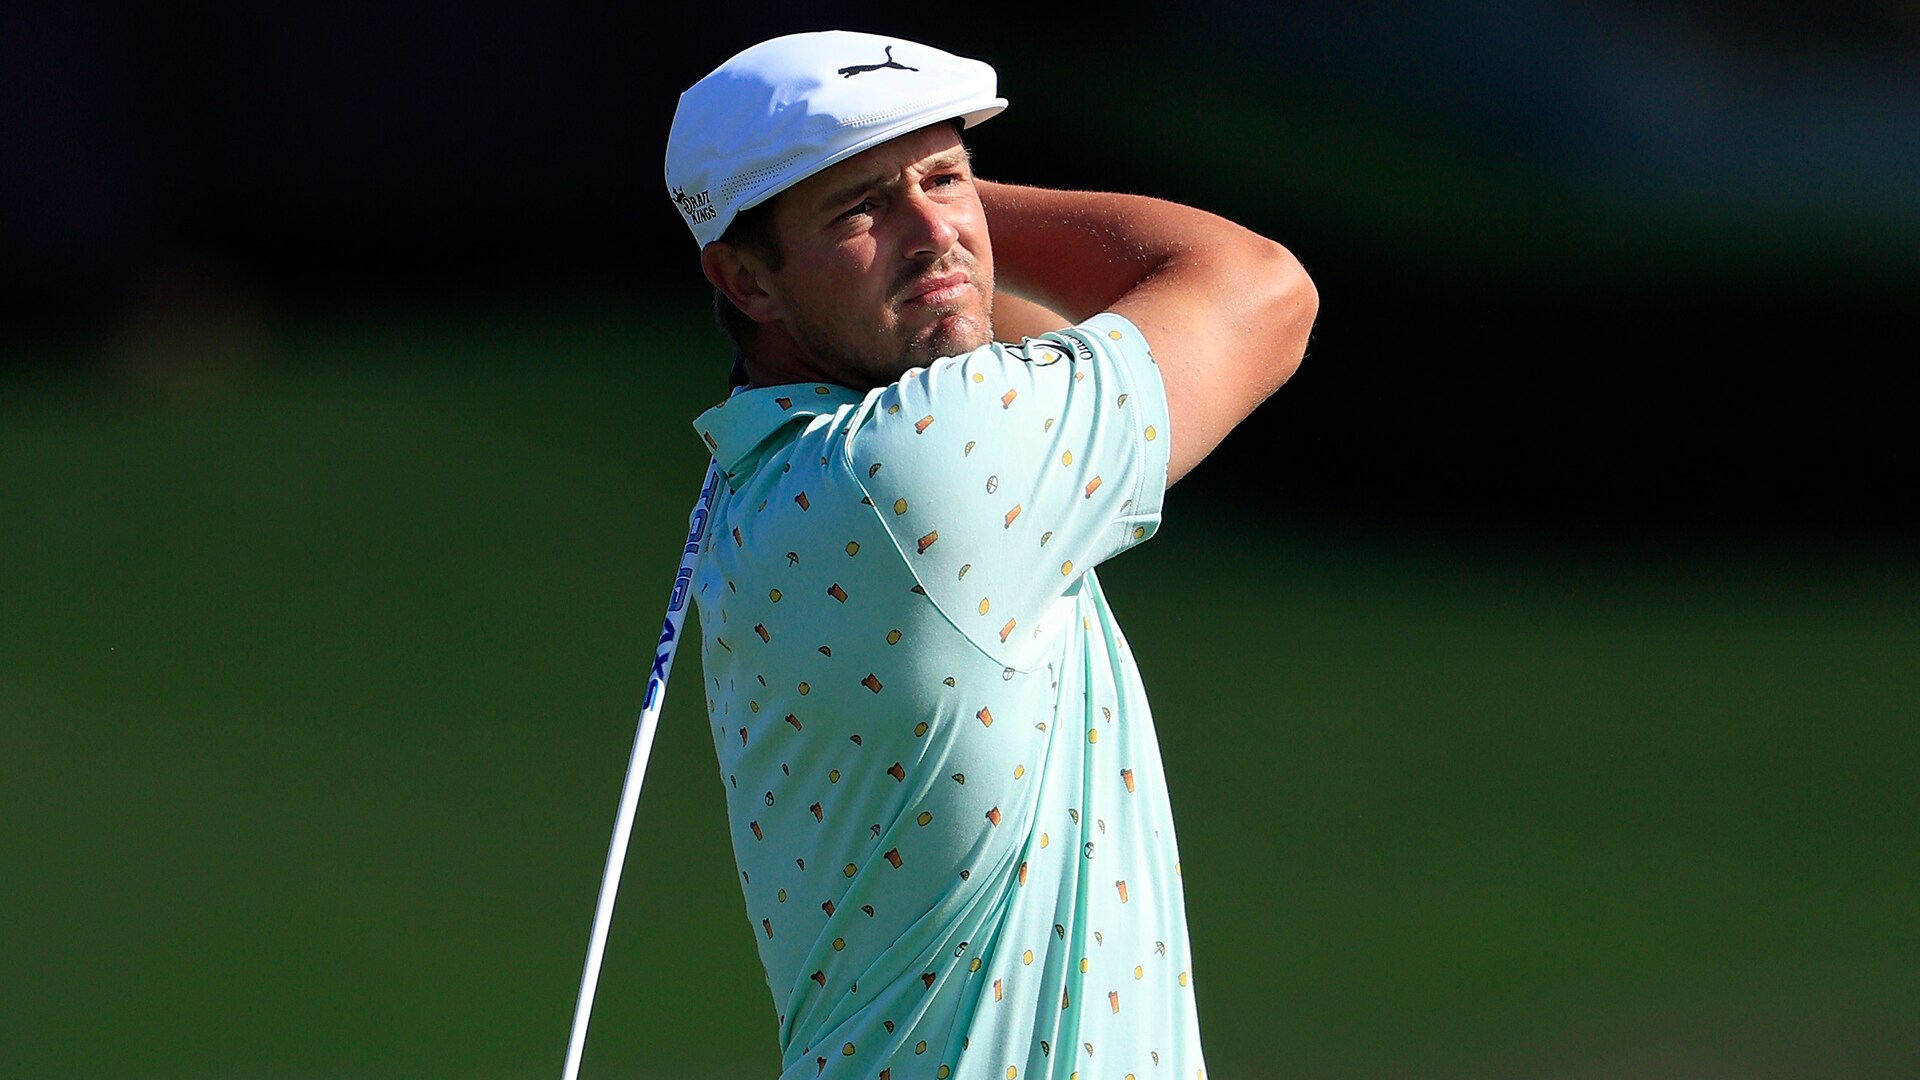 After another tease at No. 6, Bryson DeChambeau may be close to finally pulling trigger